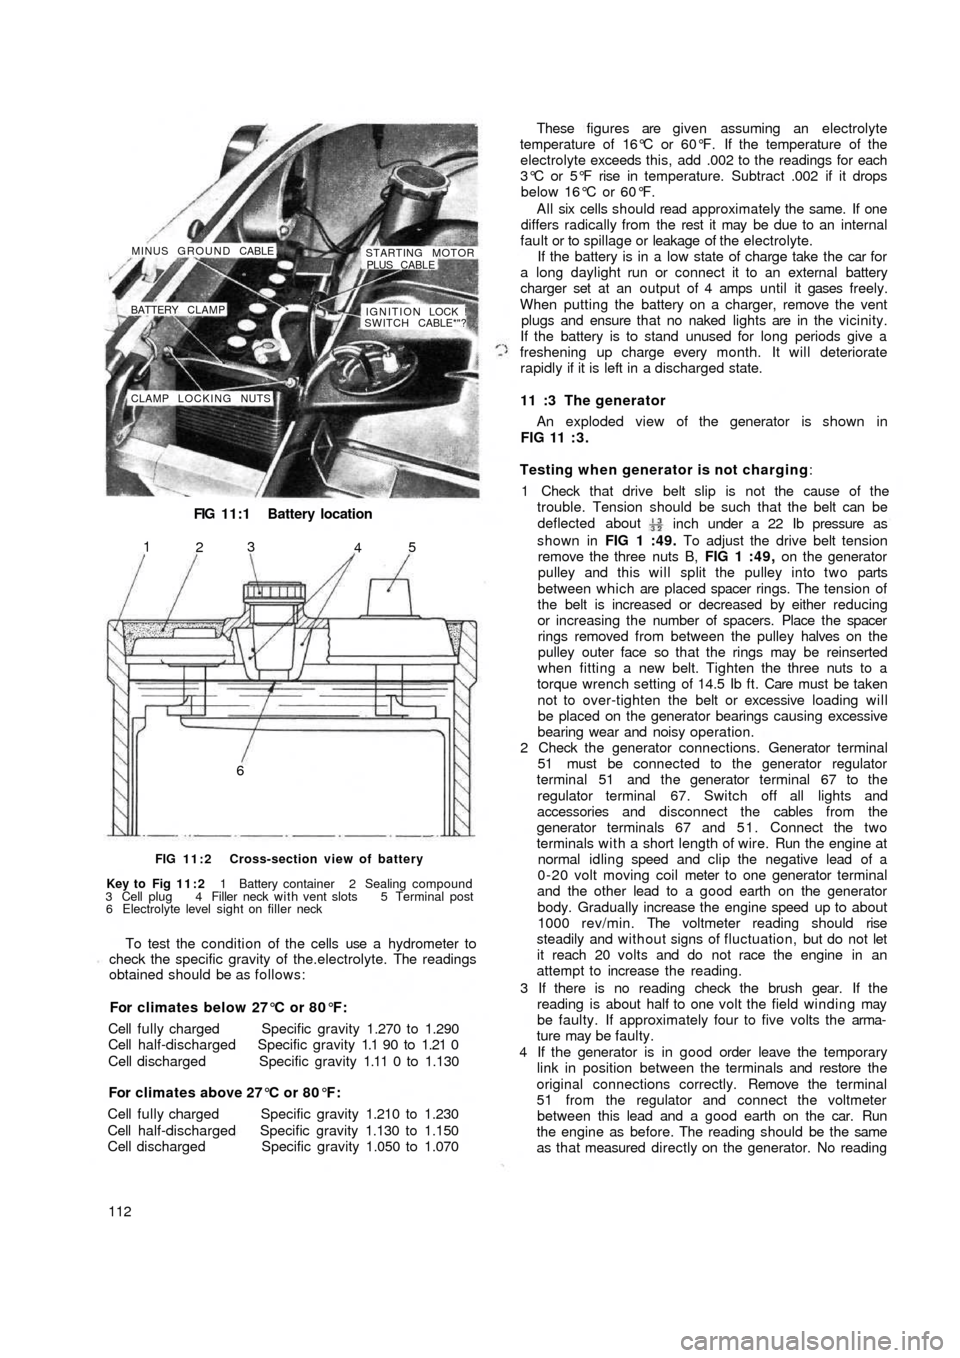 FIAT 500 1960 1.G Workshop Manual FIG 11:1 Battery location
CLAMP LOCKING NUTSIGNITION LOCK !
SWITCH CABLE*"? BATTERY CLAMP MINUS GROUND CABLE
STARTING MOTOR
PLUS CABLE
65
4 3
2 1
FIG 11:2 Cross-section view of battery
Key to  Fig  11